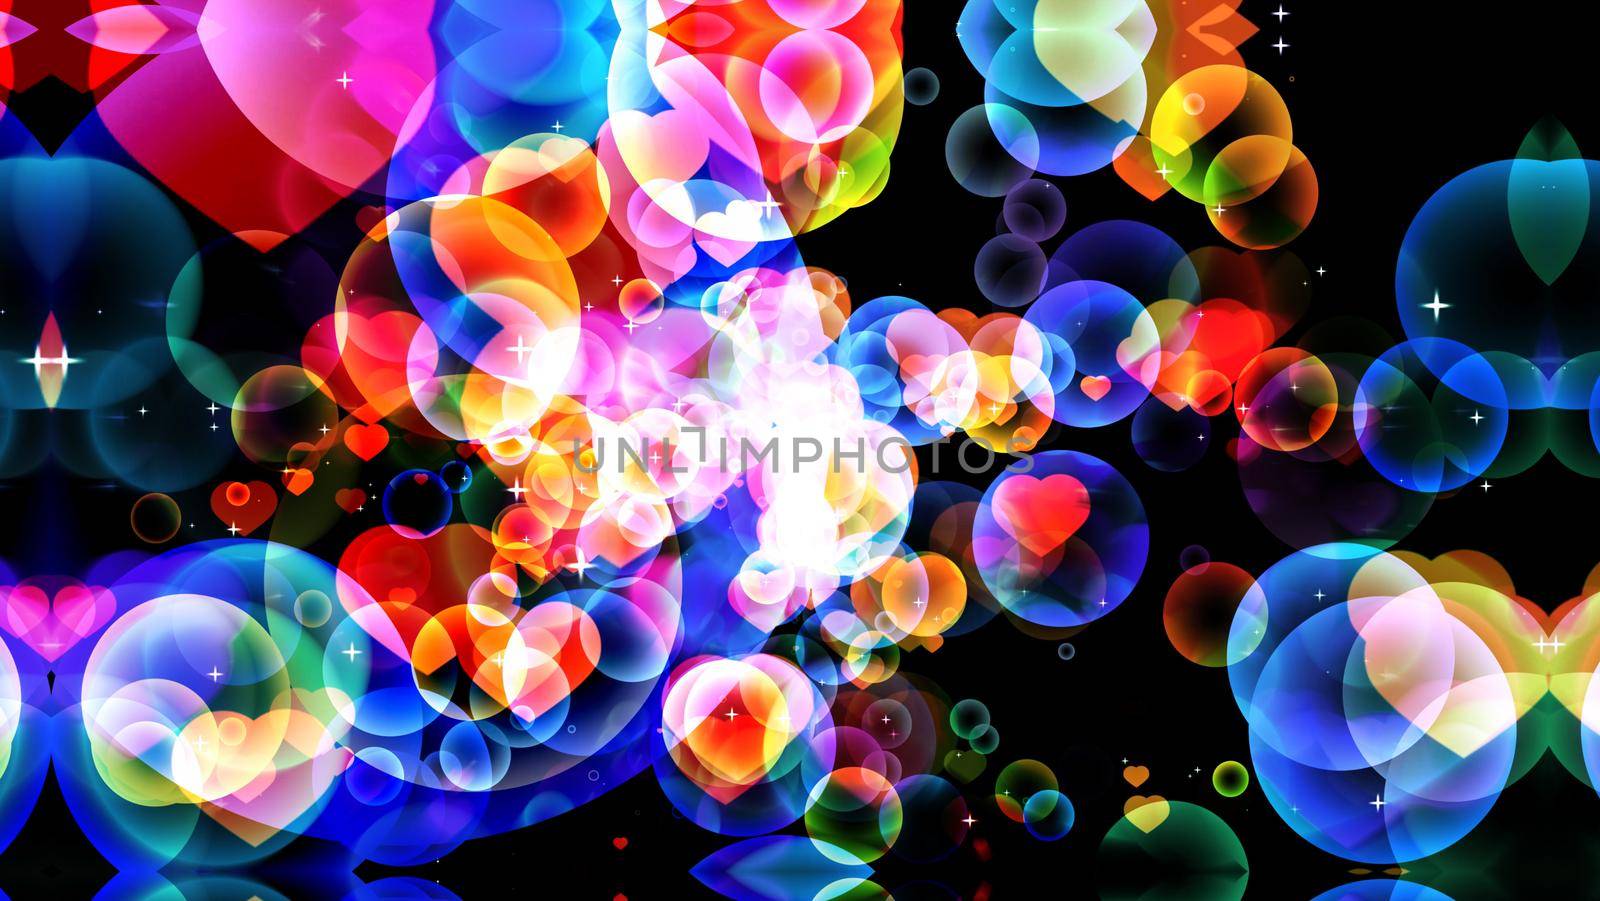 rainbow bubbles  abstract dimension dark tone with hearts on black background with white star theme valentine day and love concept